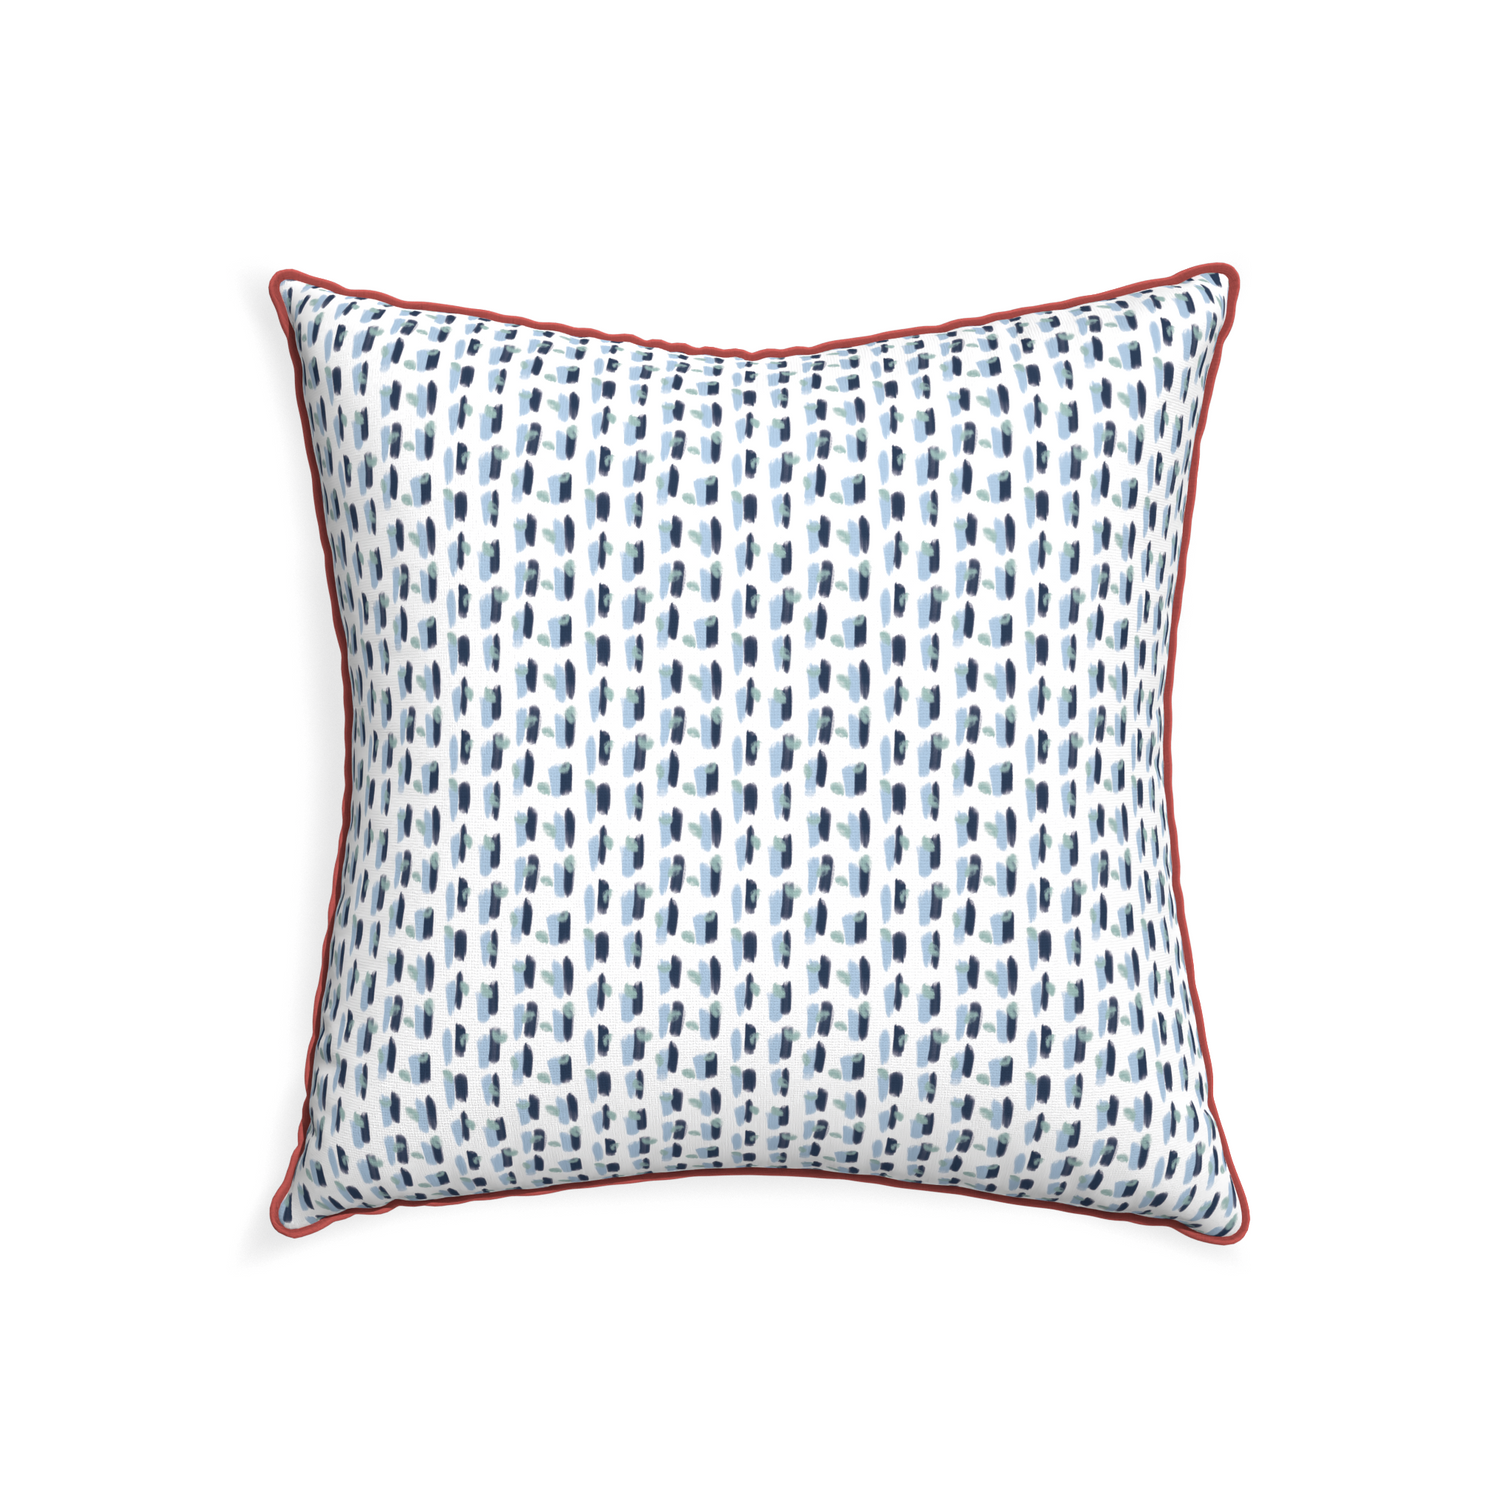 22-square poppy blue custom pillow with c piping on white background